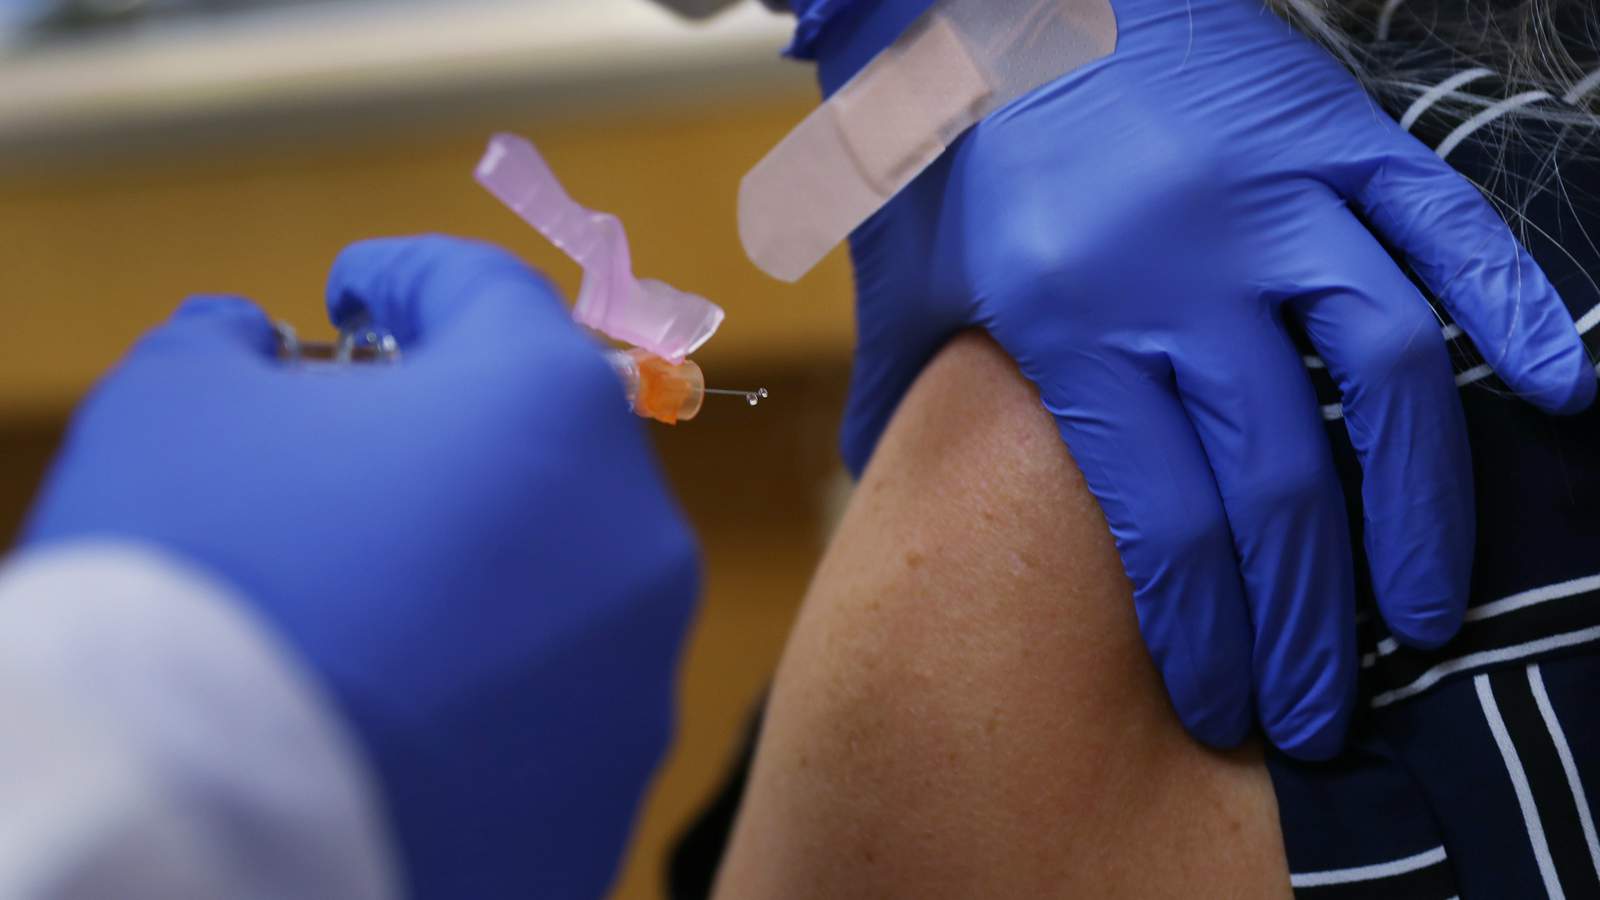 Study suggests flu shots help people with COVID-19